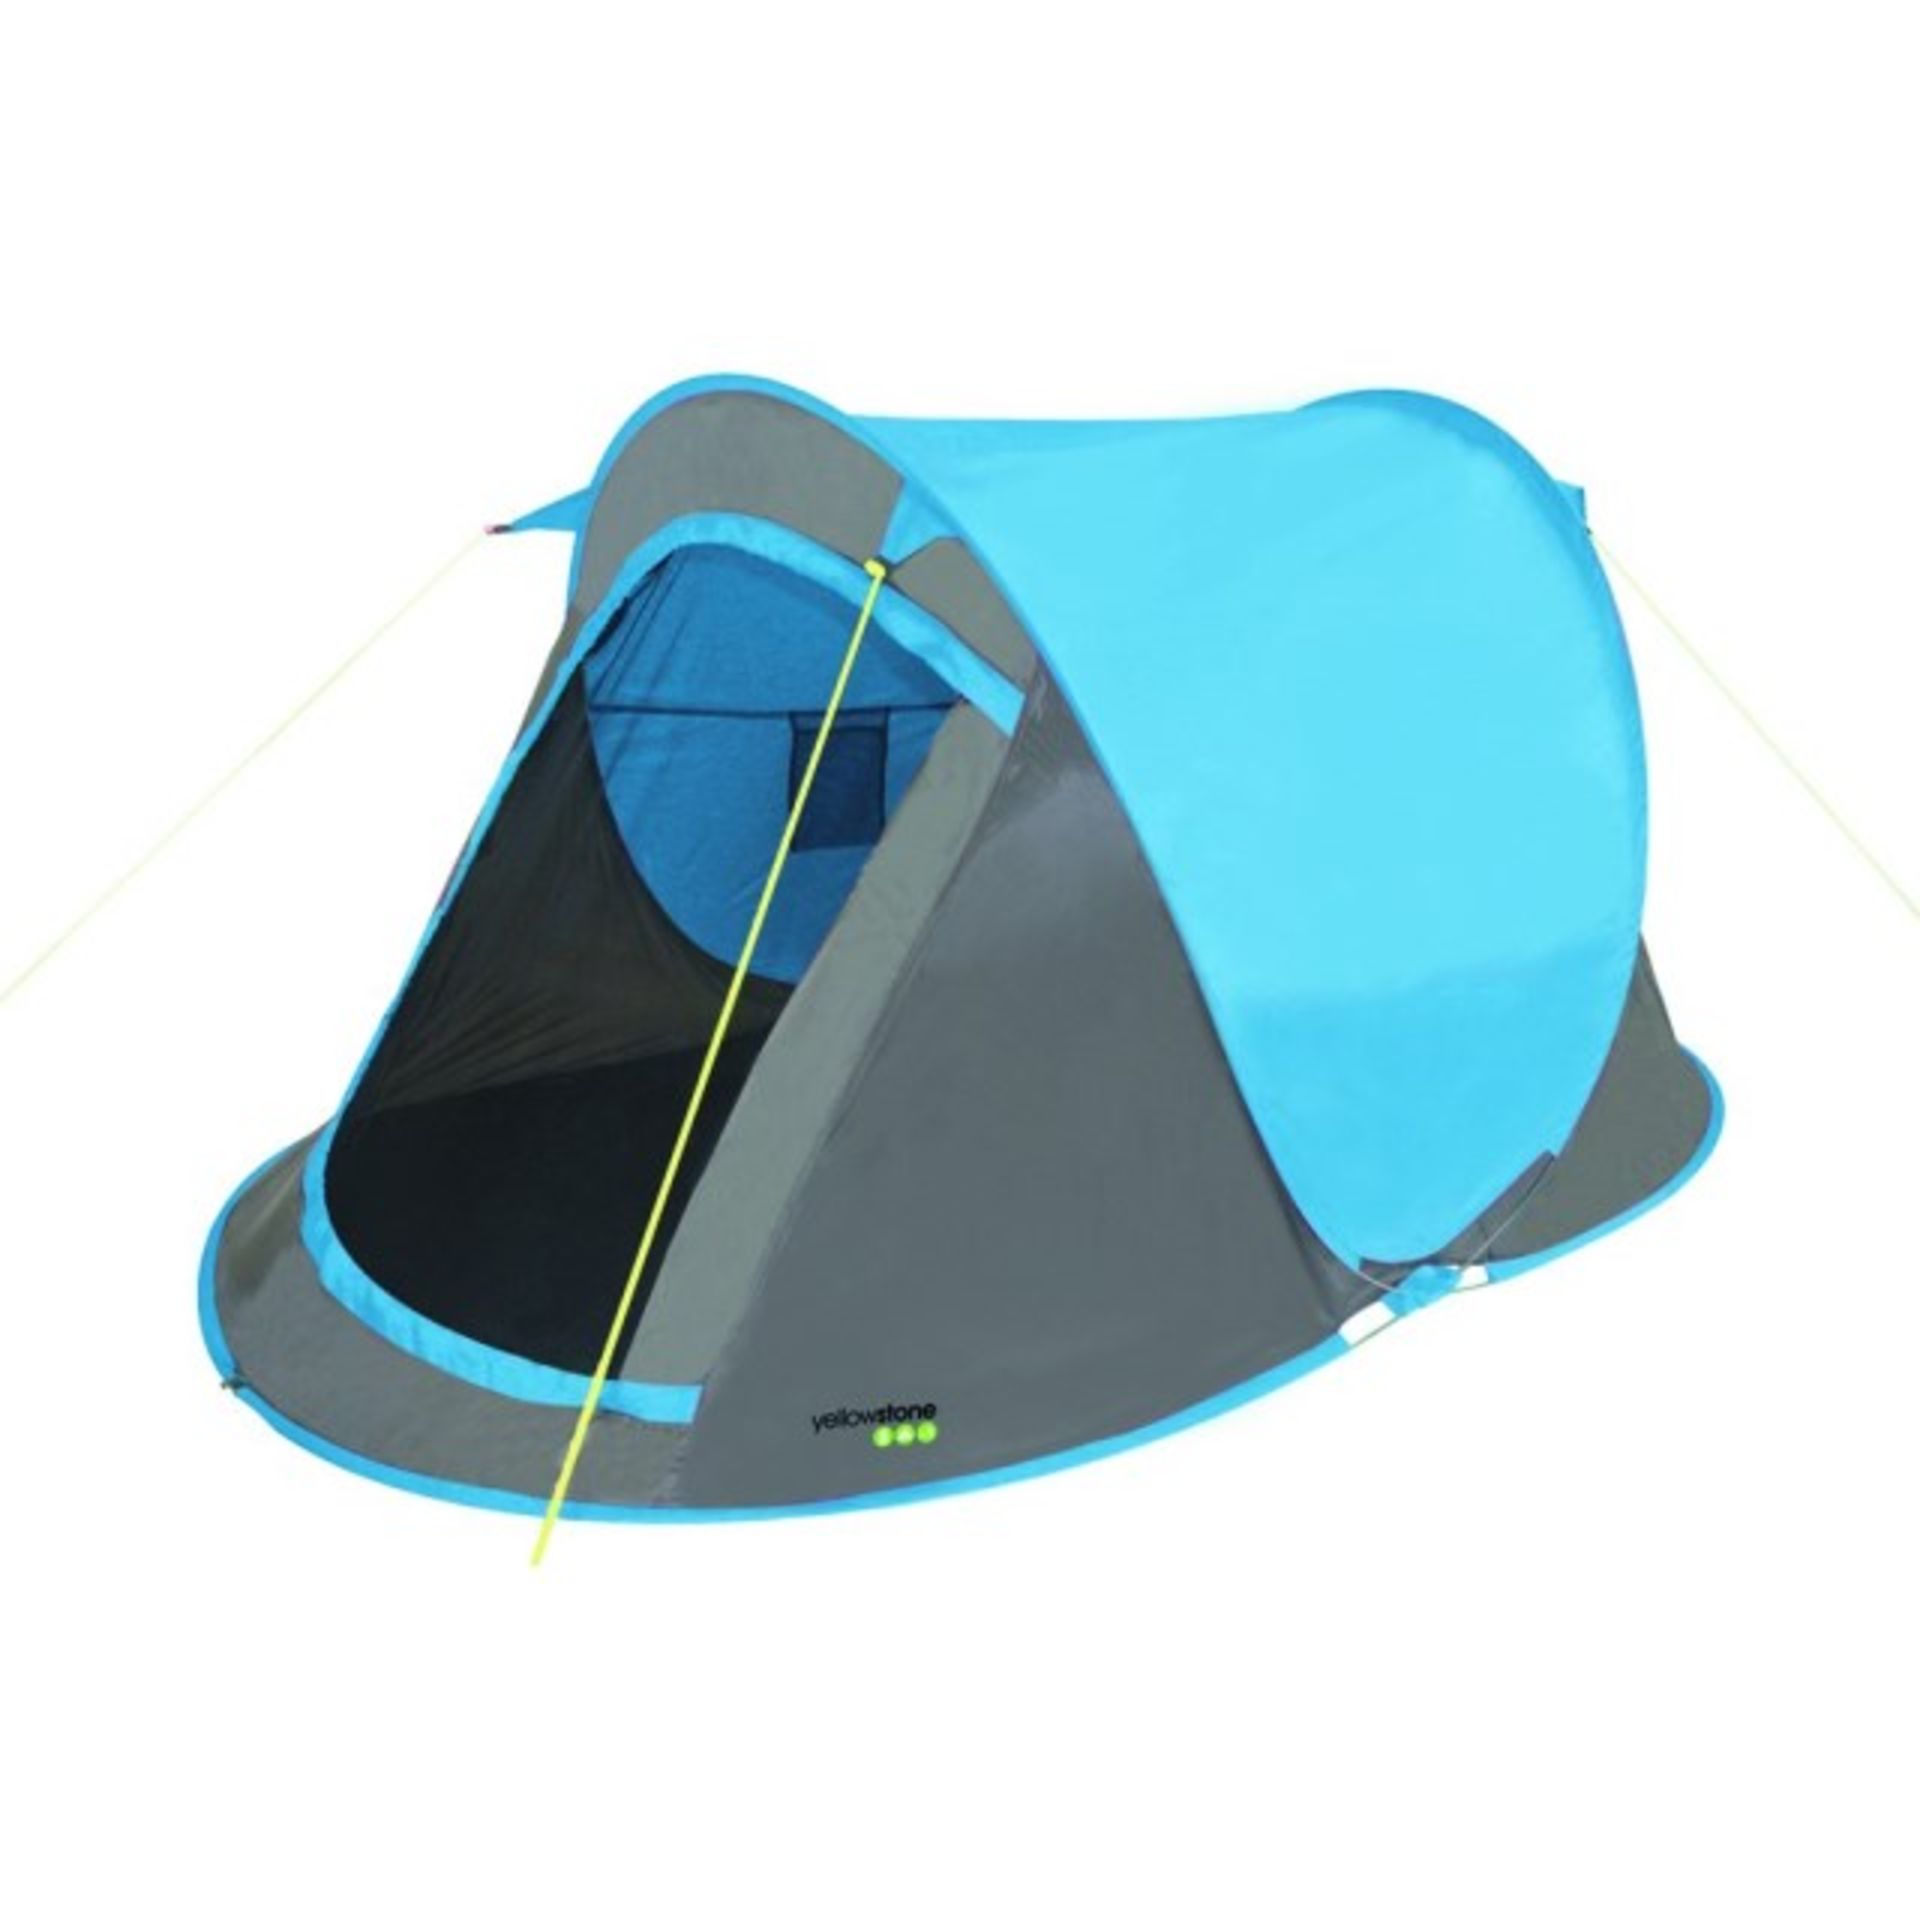 V Brand New Blue Fast Pitch Pop Up 2 Man Tent with Hi Viz Guy Ropes X 4 Bid price to be multiplied